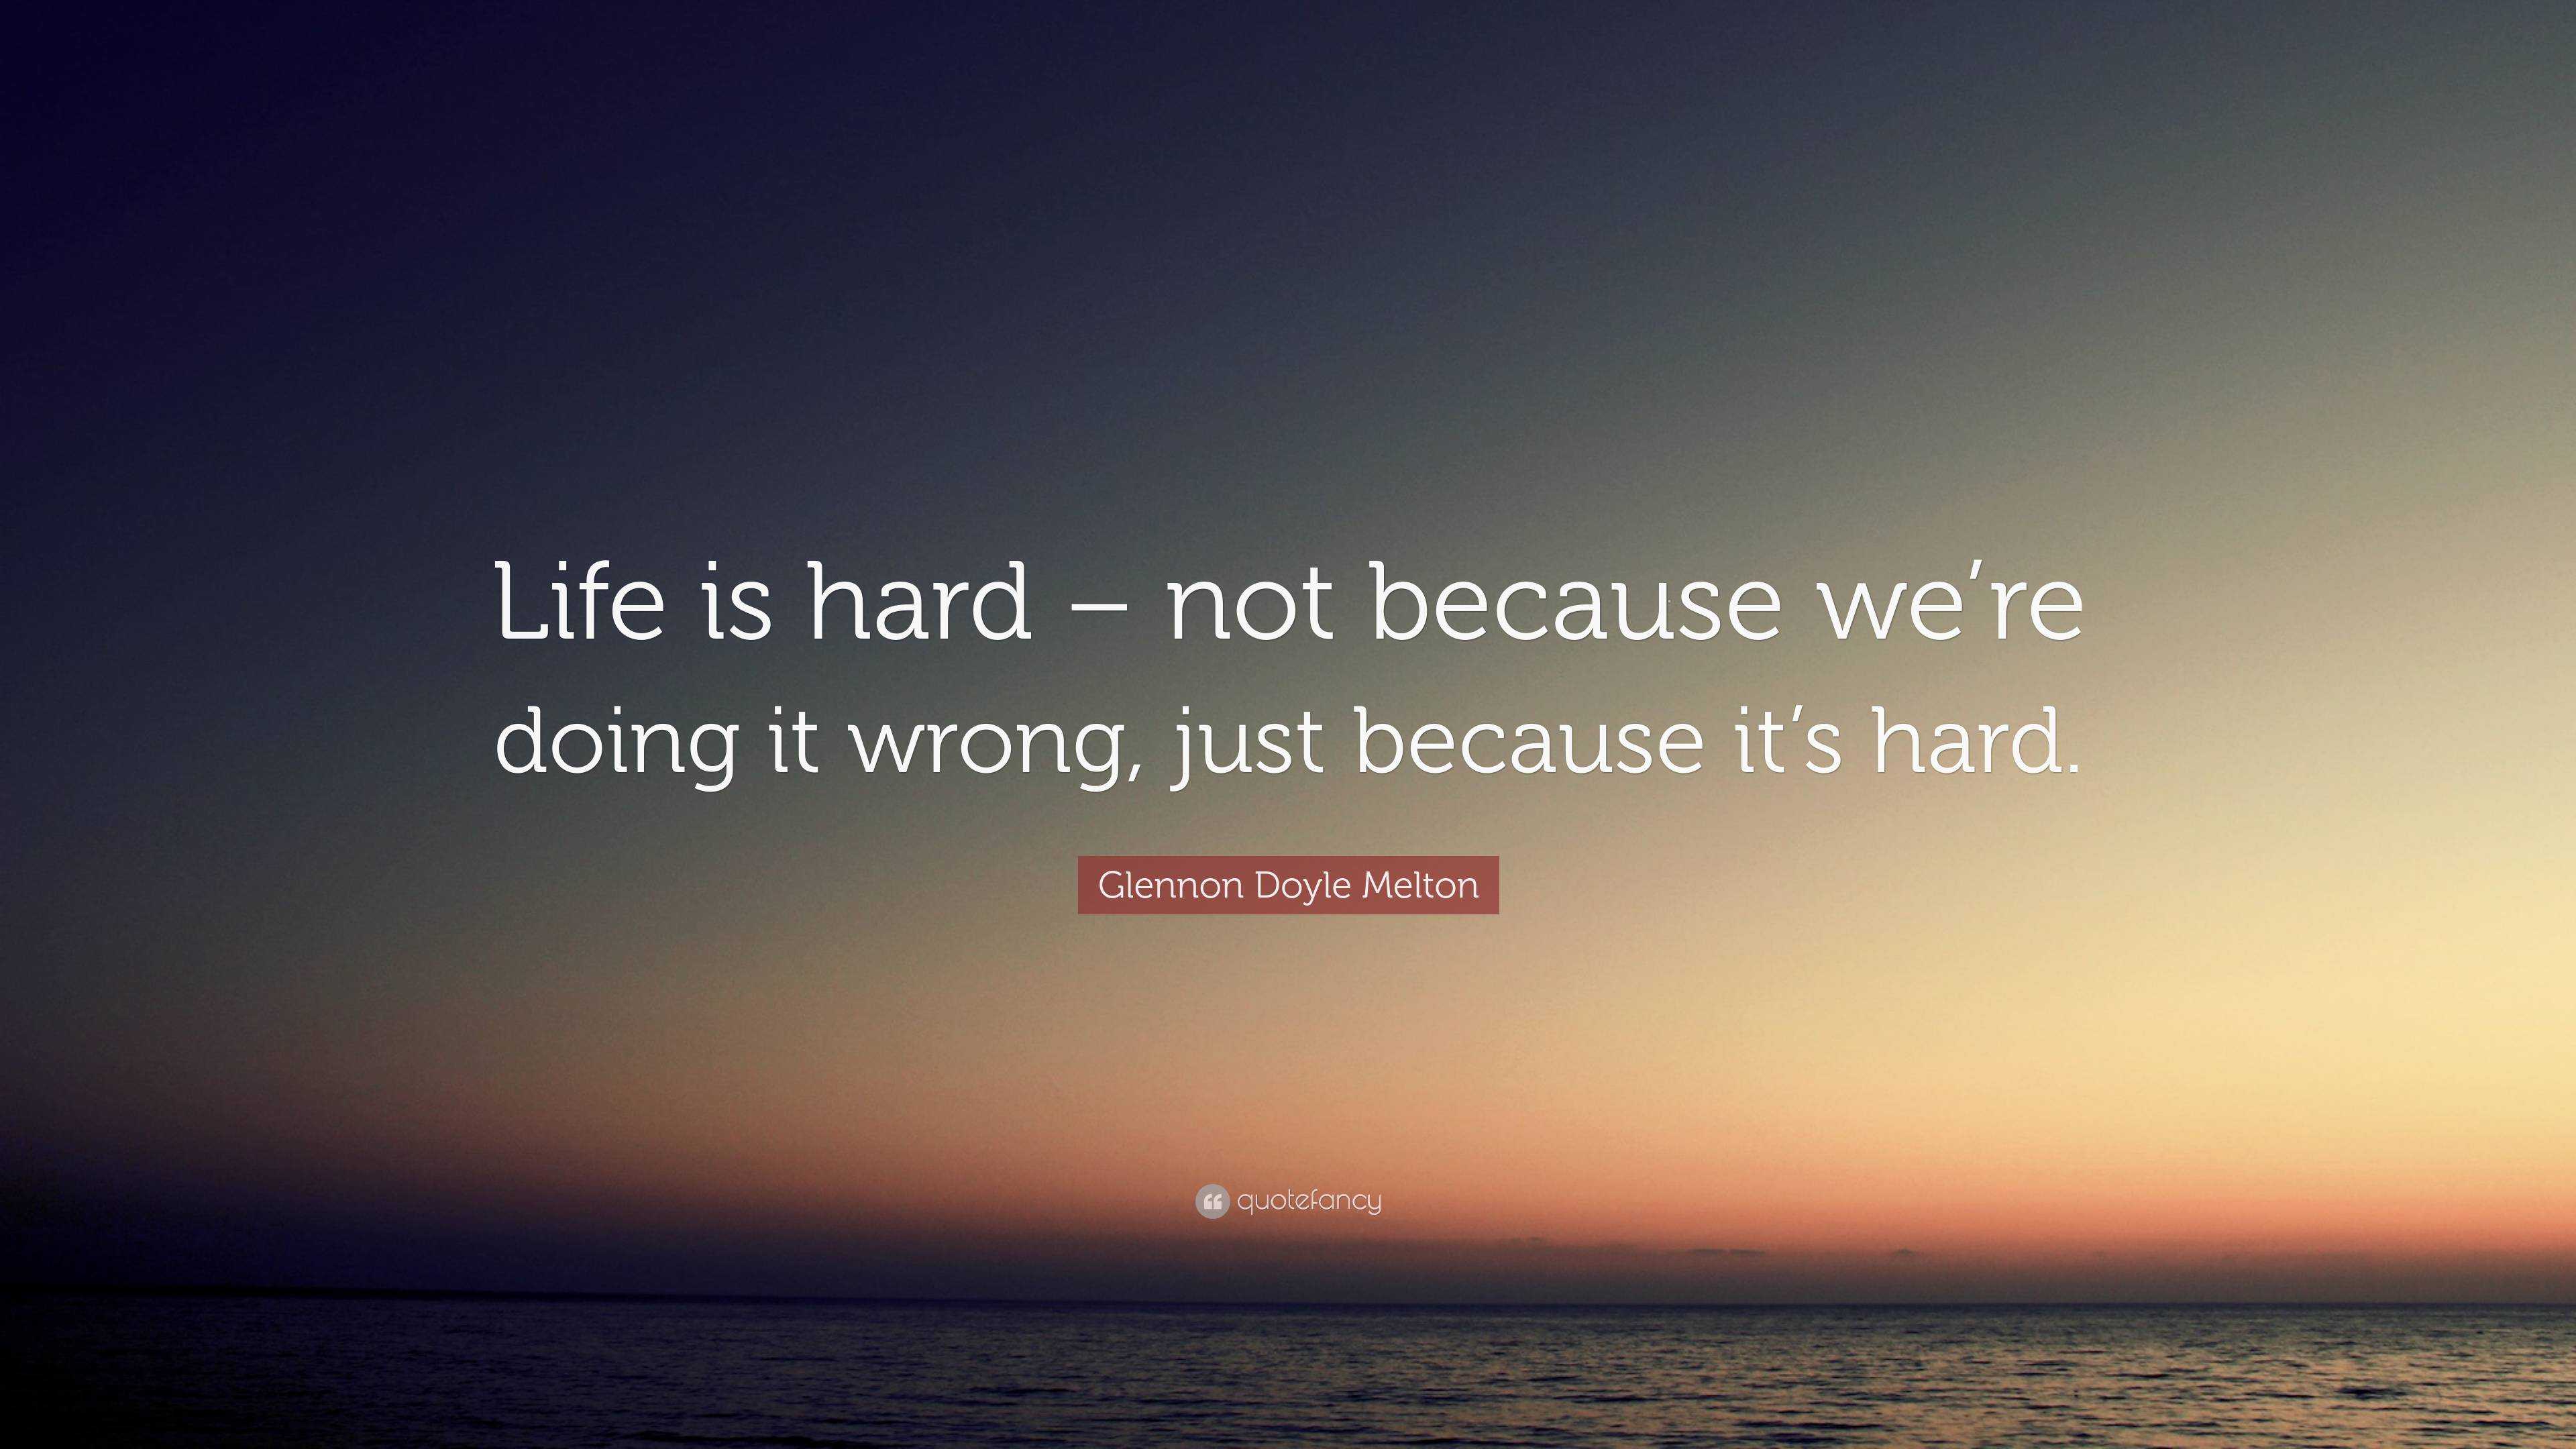 Glennon Doyle Melton Quote: “Life is hard – not because we’re doing it ...